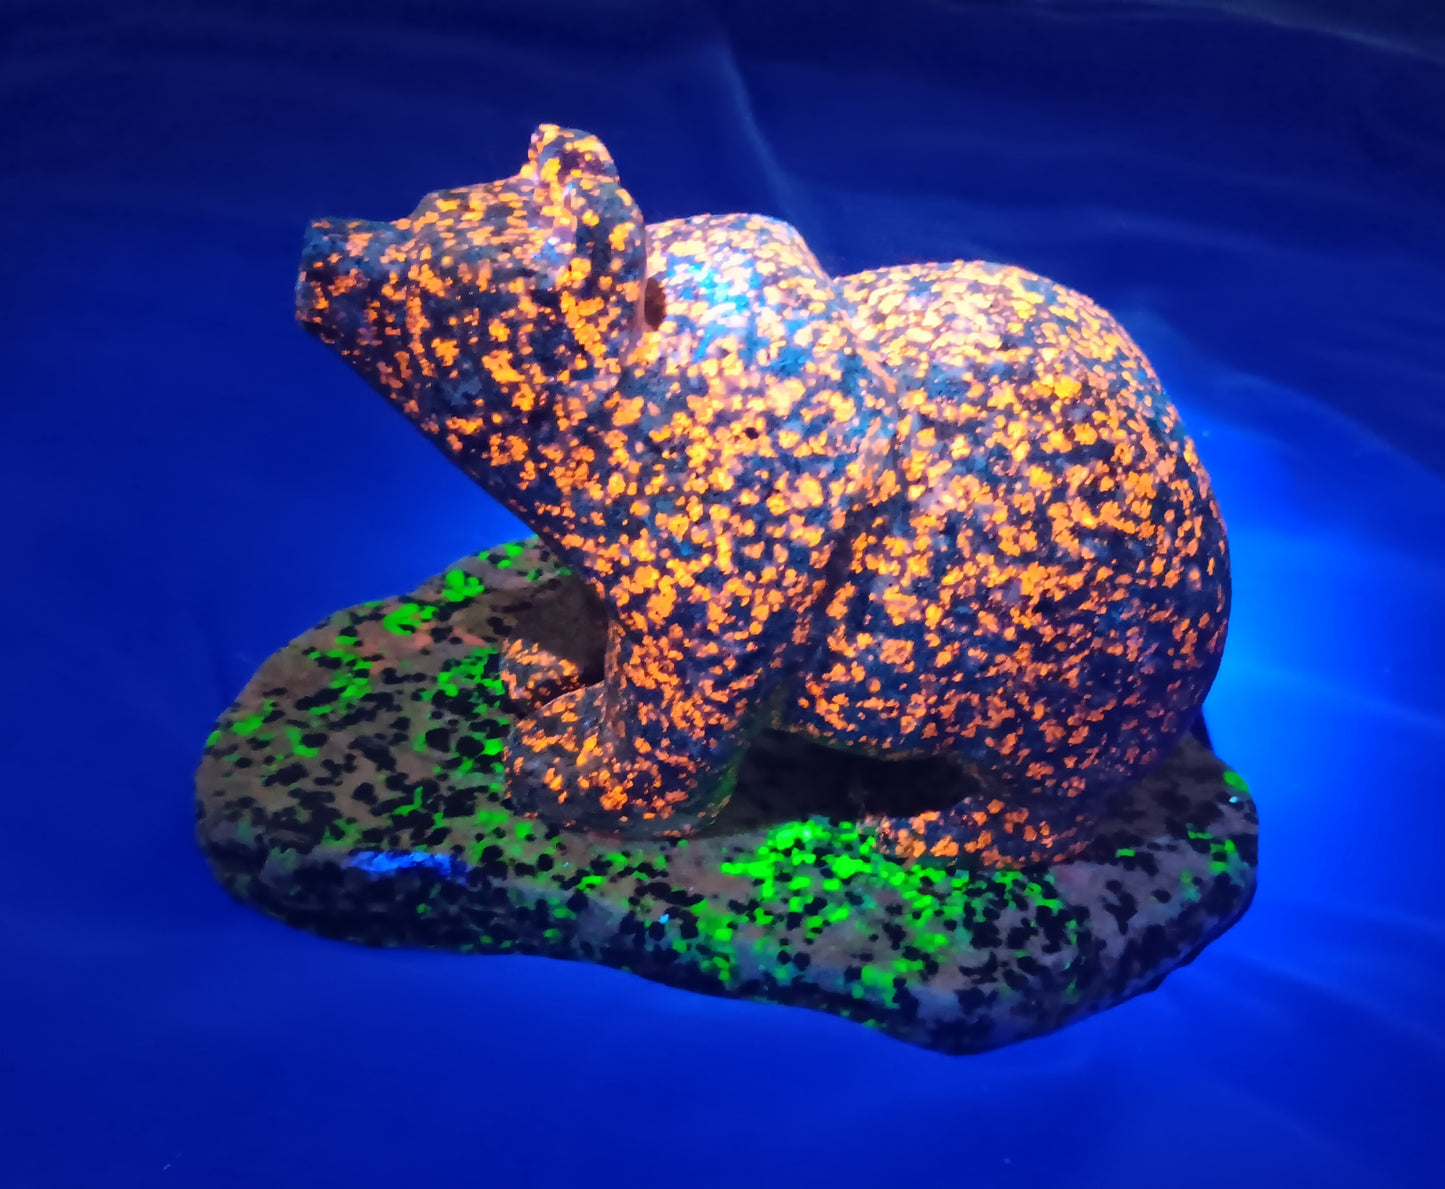 Yooperlight Bear Carving with Willemite Base